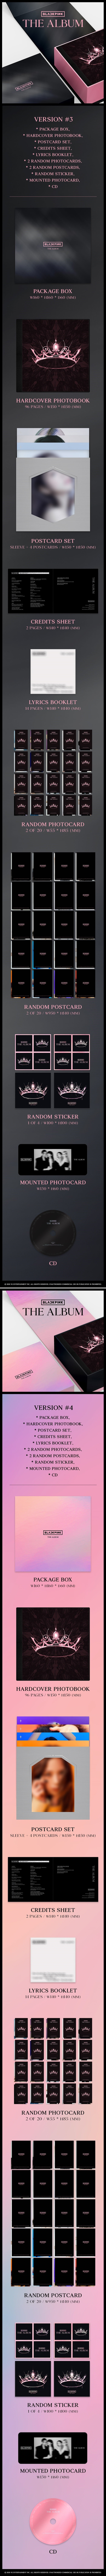 BLACKPINK 1st FULL ALBUM [THE ALBUM] BLACKPINK, who debuted with ‘SQUARE ONE’ in 2016 and grew into a global artist, will ...